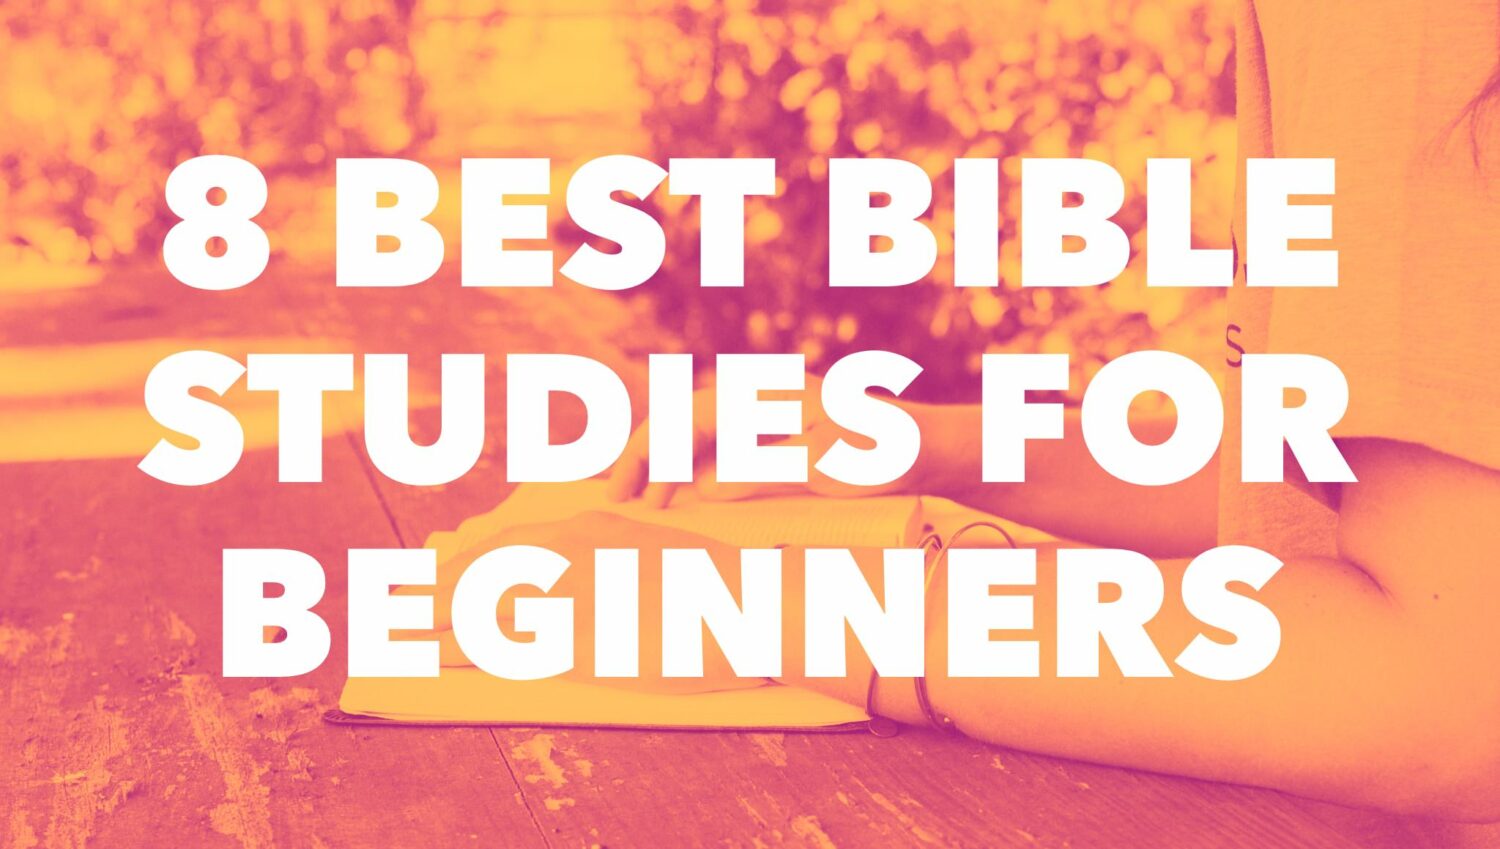 Bible Study for Beginners – The Top 8 Reviewed